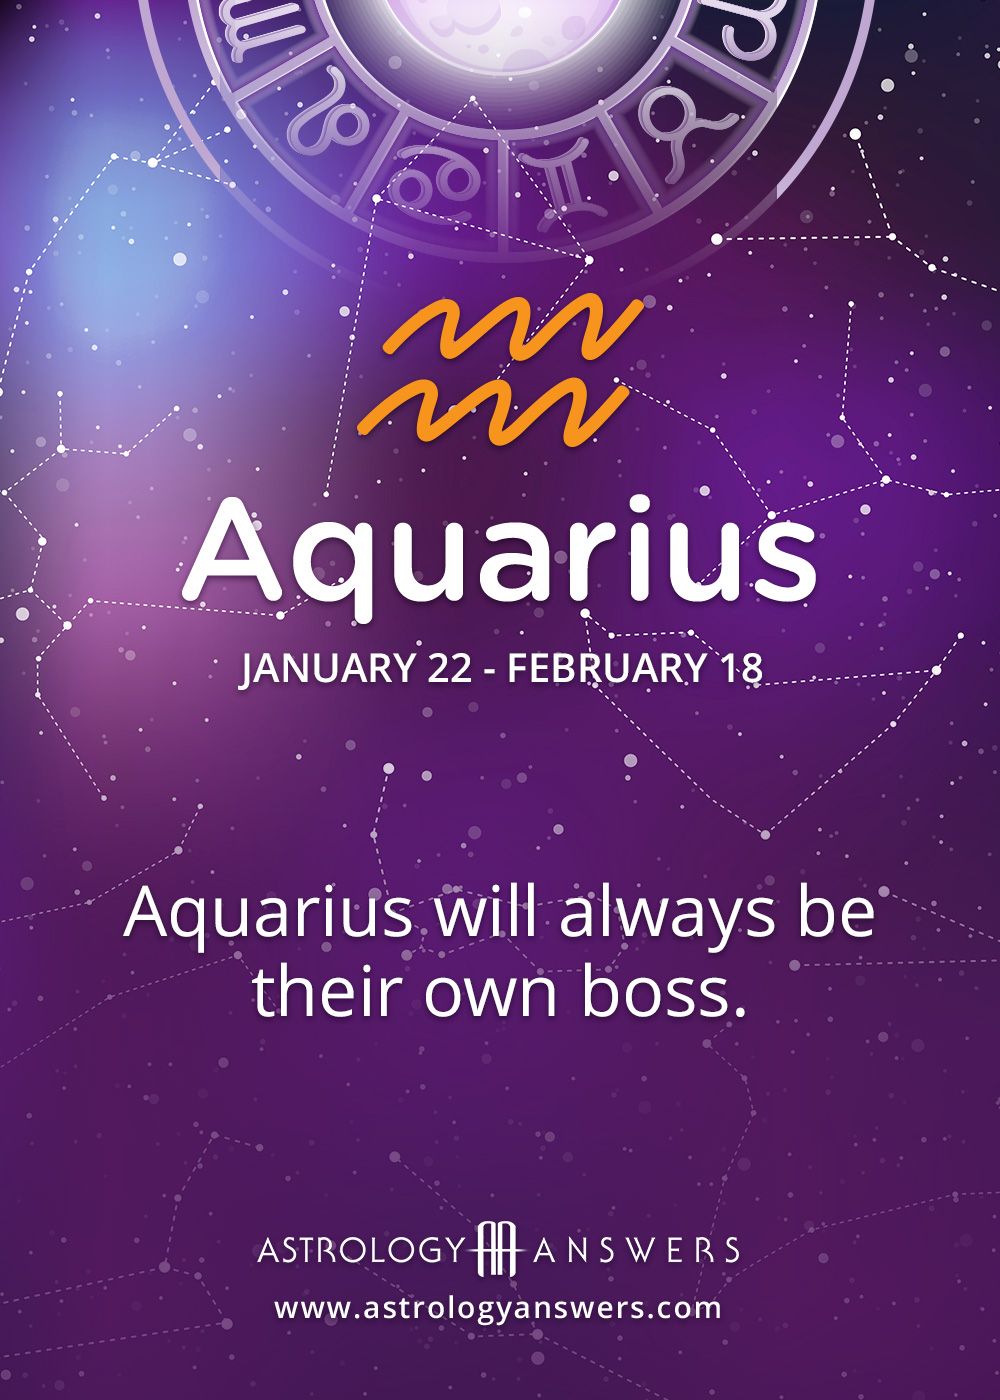 show different astrological signs for aquarius